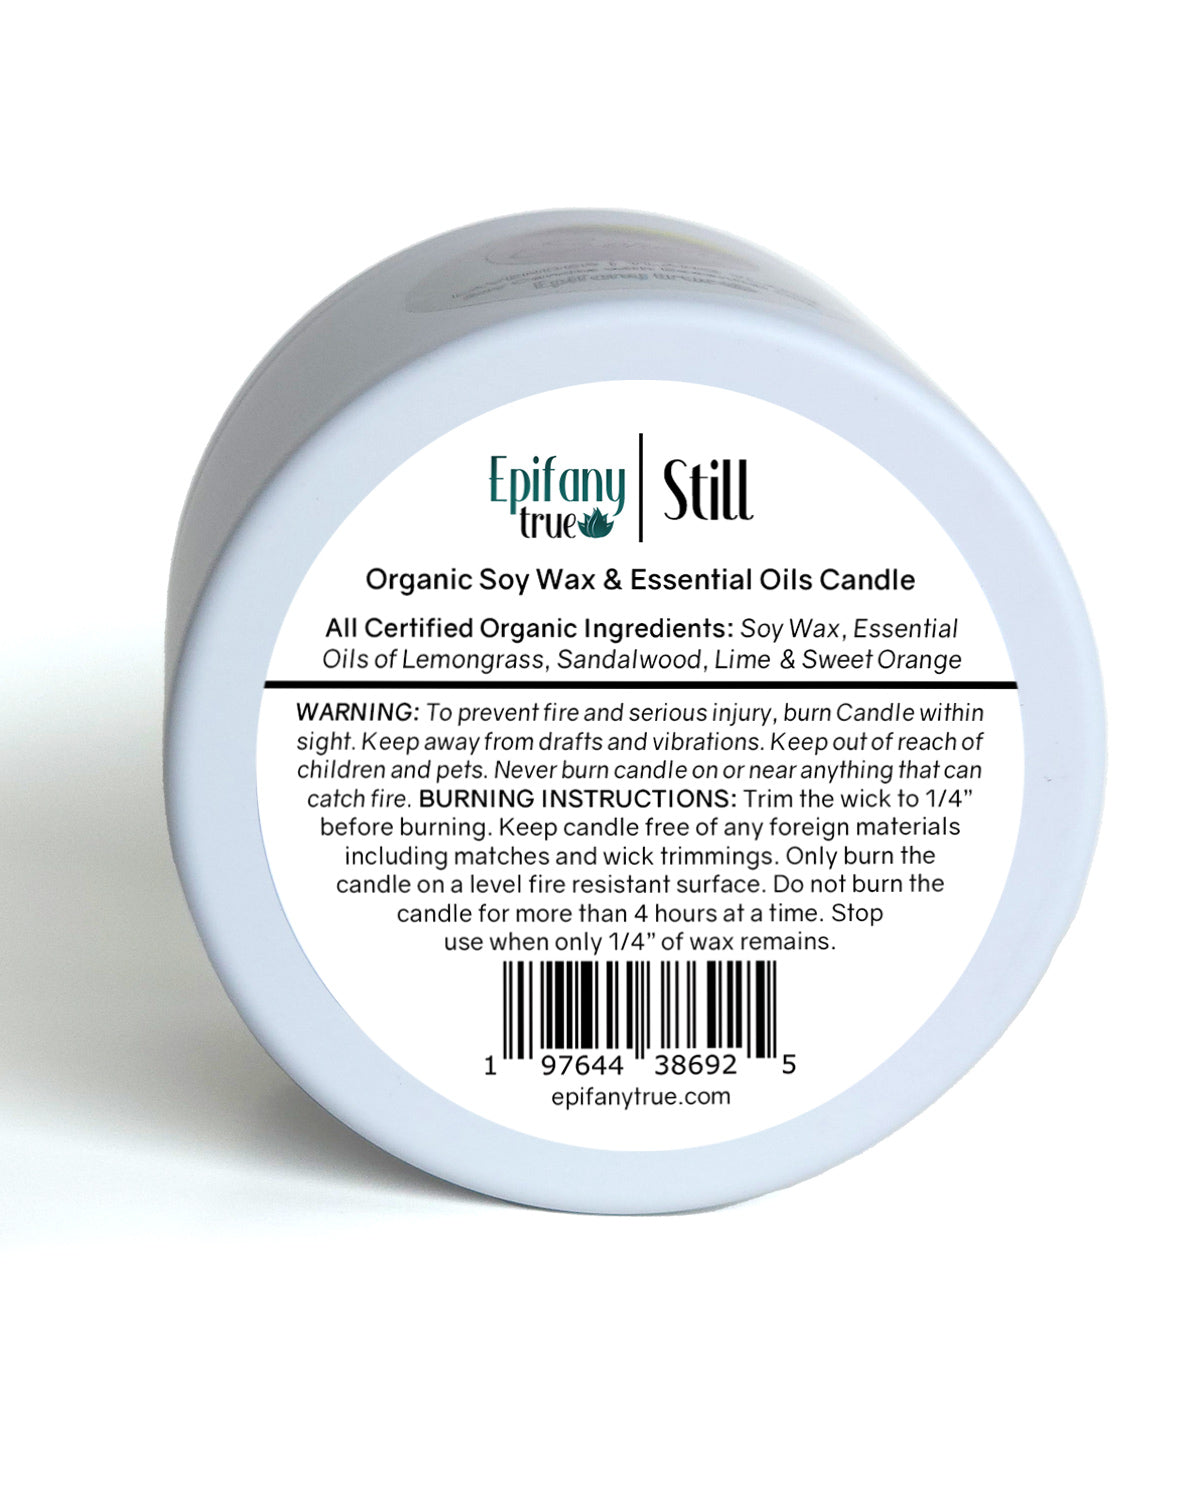 STILL Lemongrass & Sandalwood Wellness Candle with Organic Soy Wax and Essential Oils 8oz